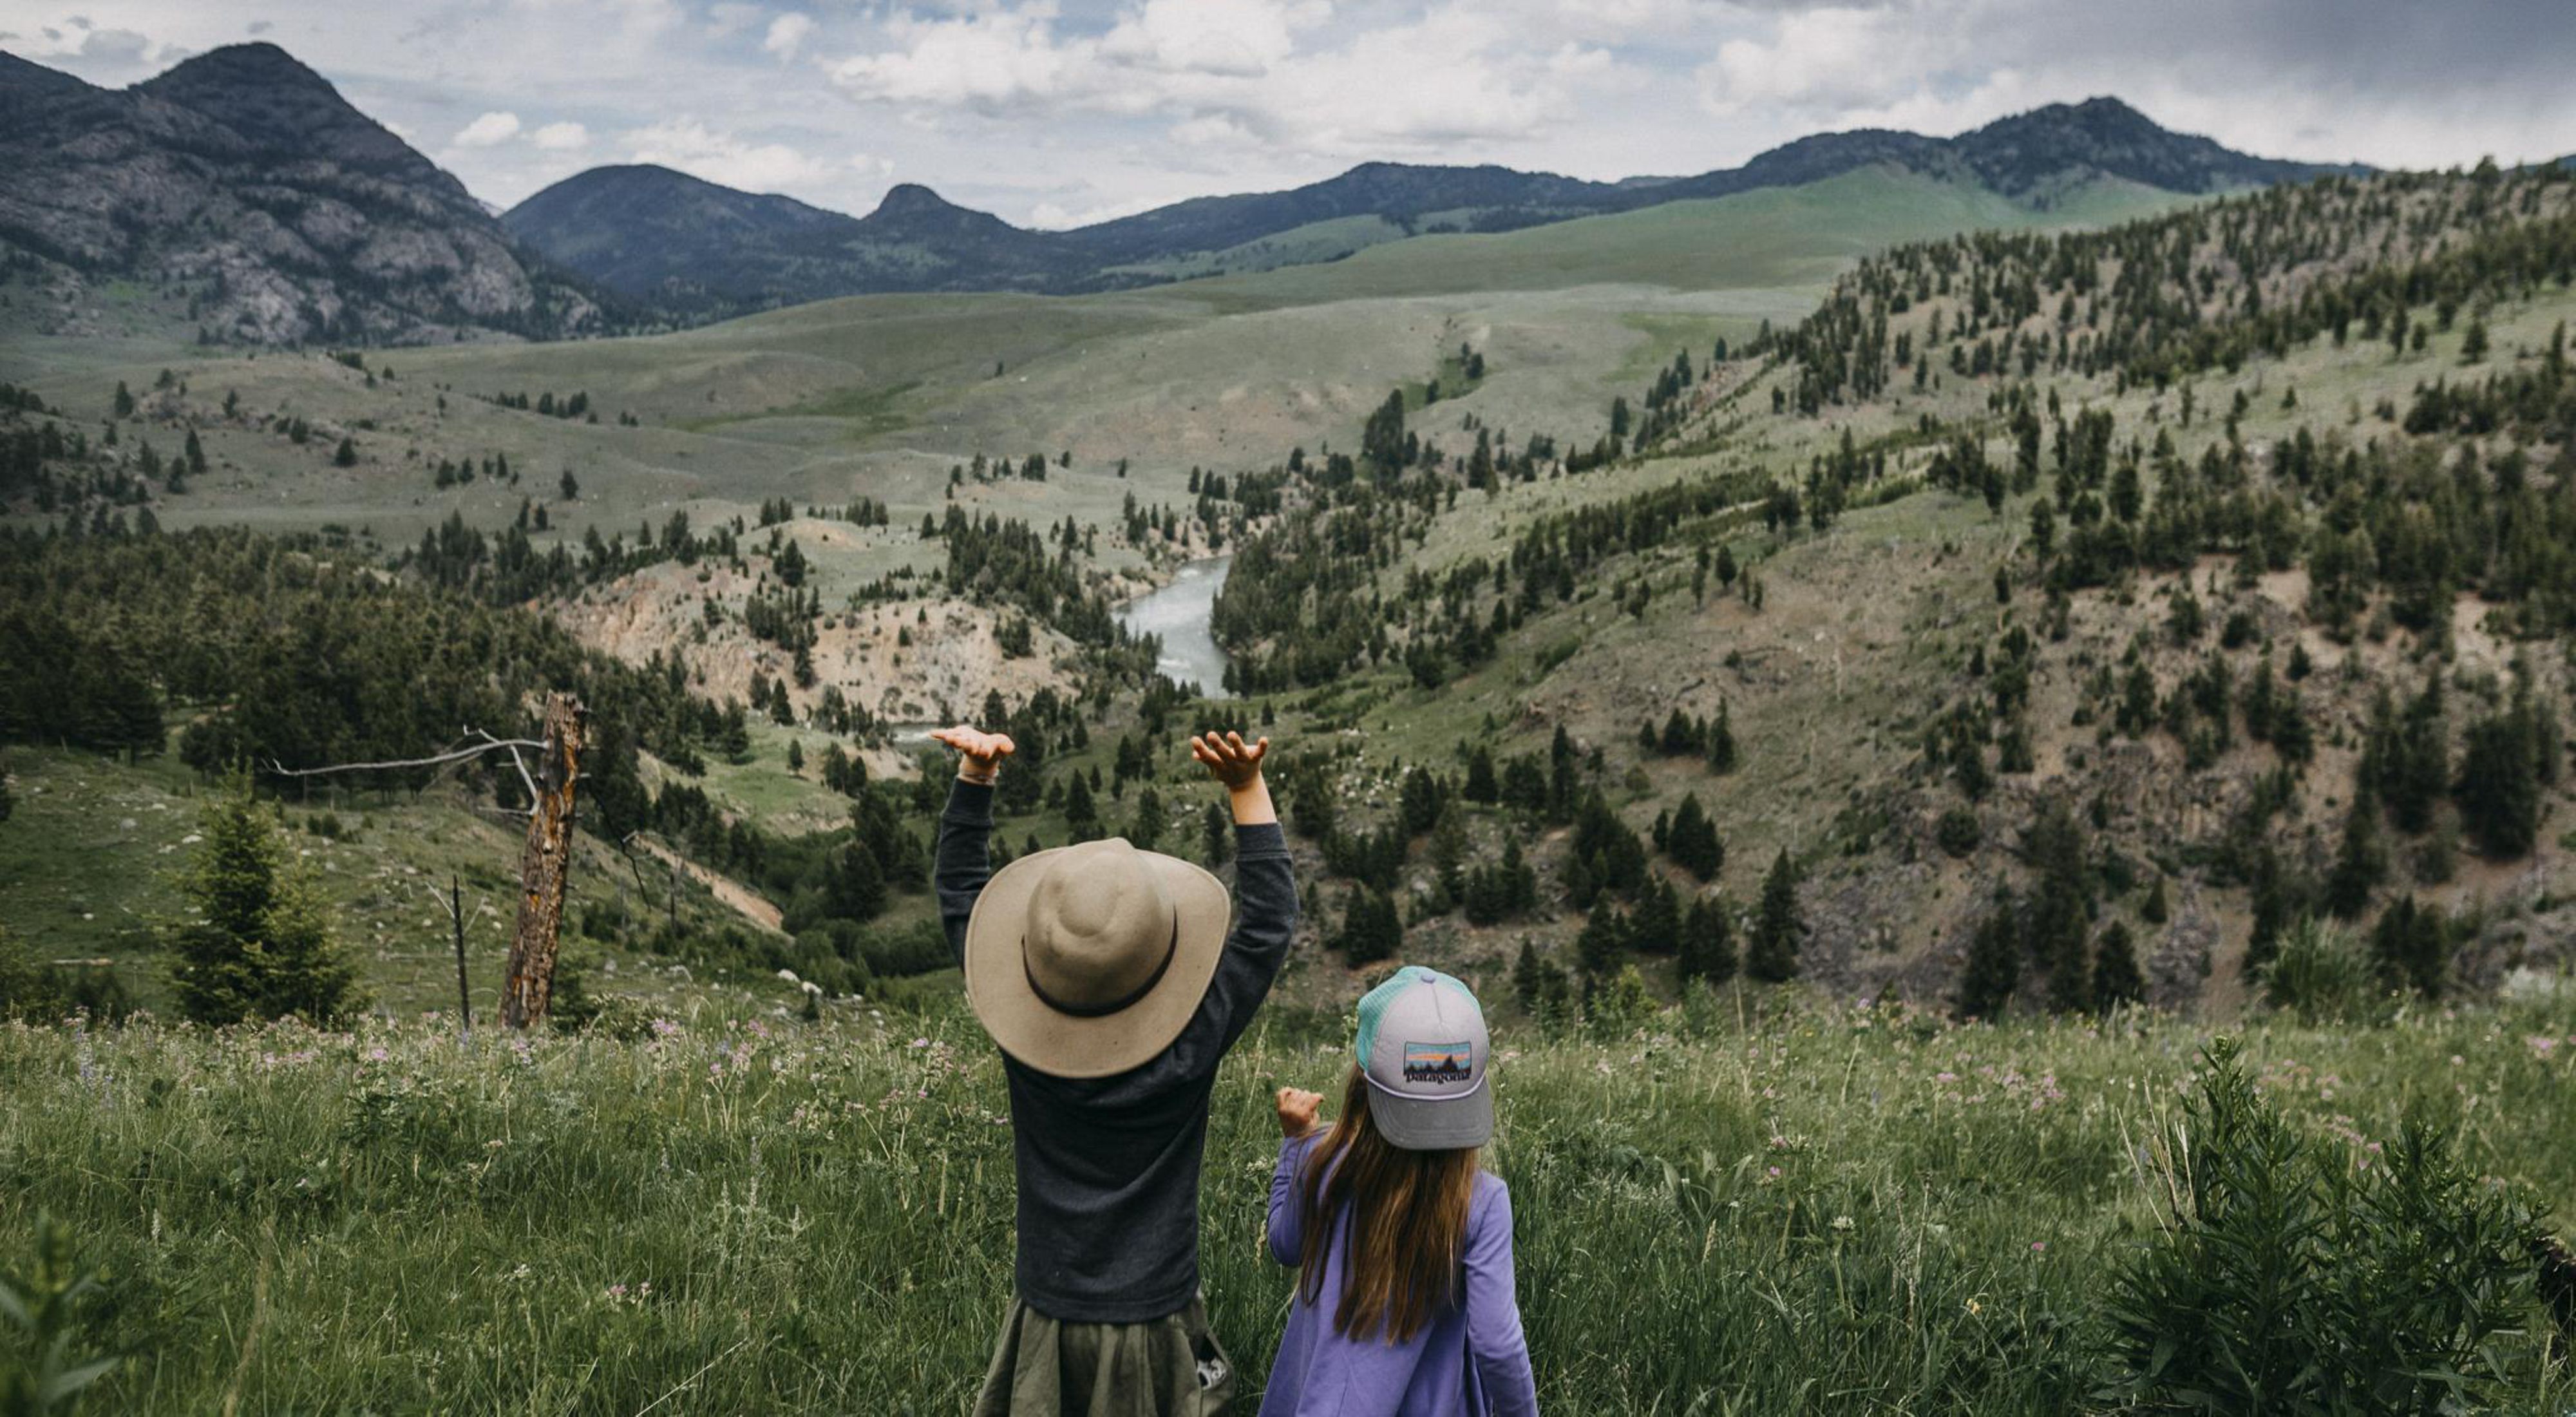 Photo of two children in foreground, sweeping views of Yellowstone National Park in background.